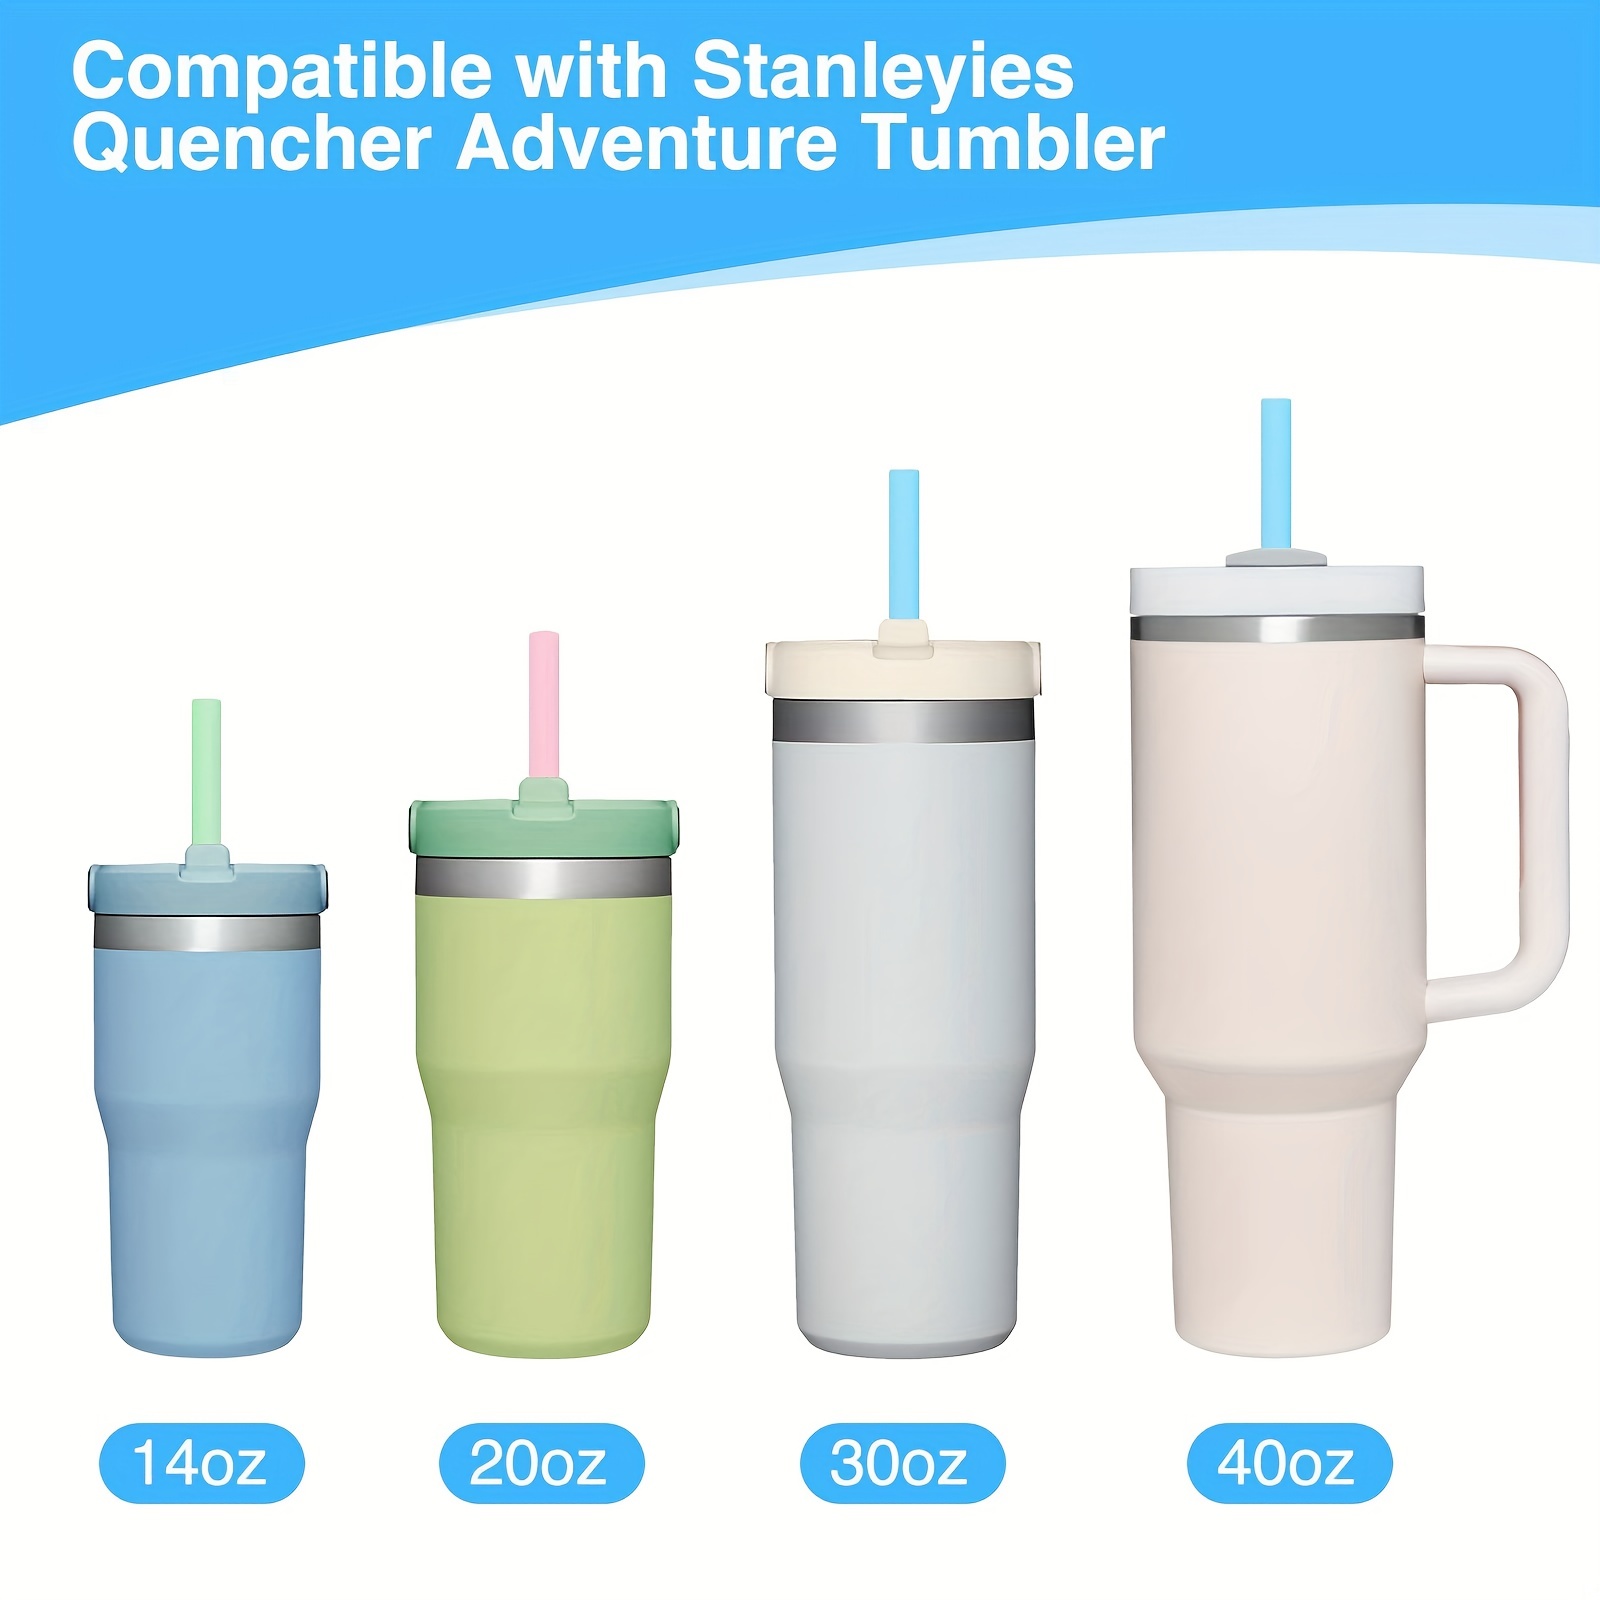 Silicone Replacement Straws For Stanley 20 30 Cup, Reusable Straws